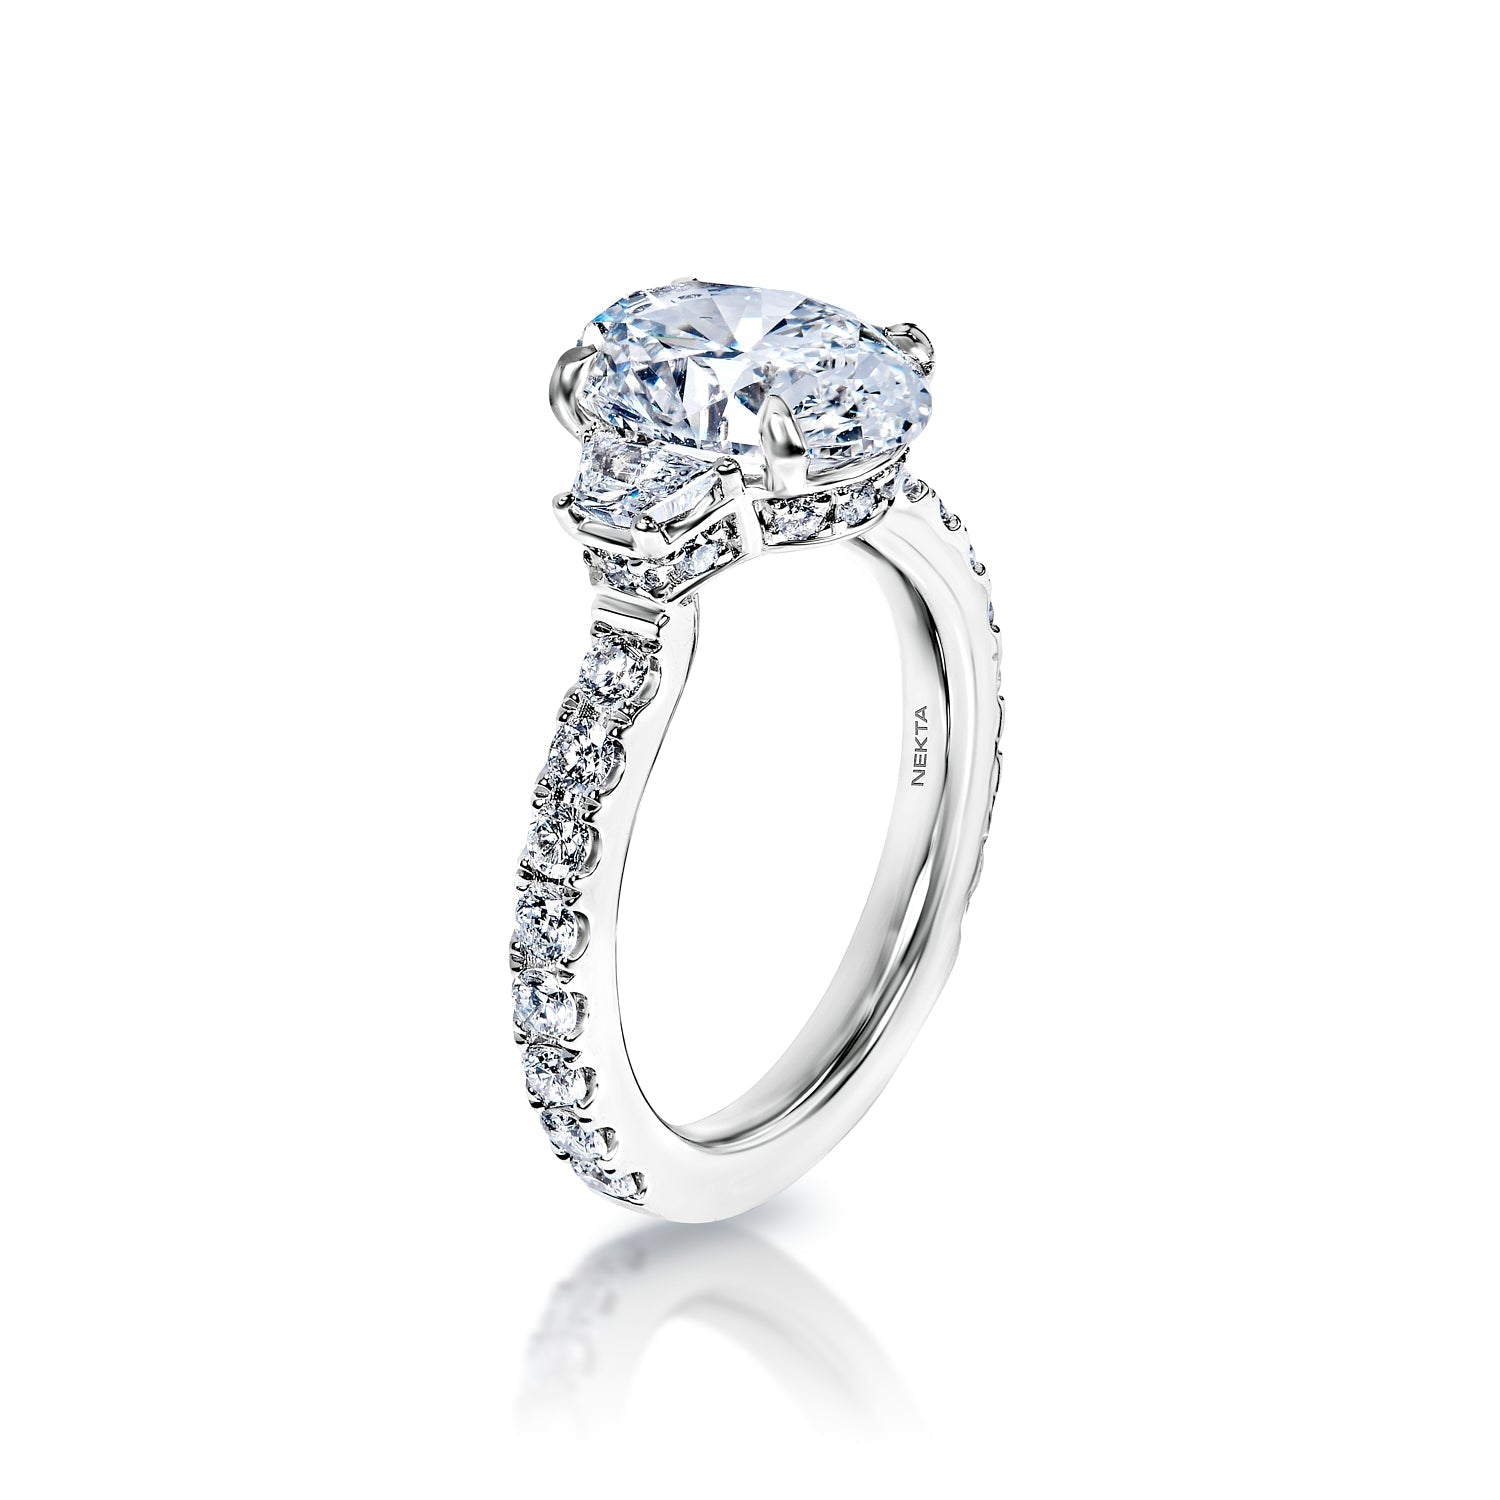 Romina 4 Carat F VVS1 Oval Cut Diamond Engagement Ring in 18k White Gold Side View